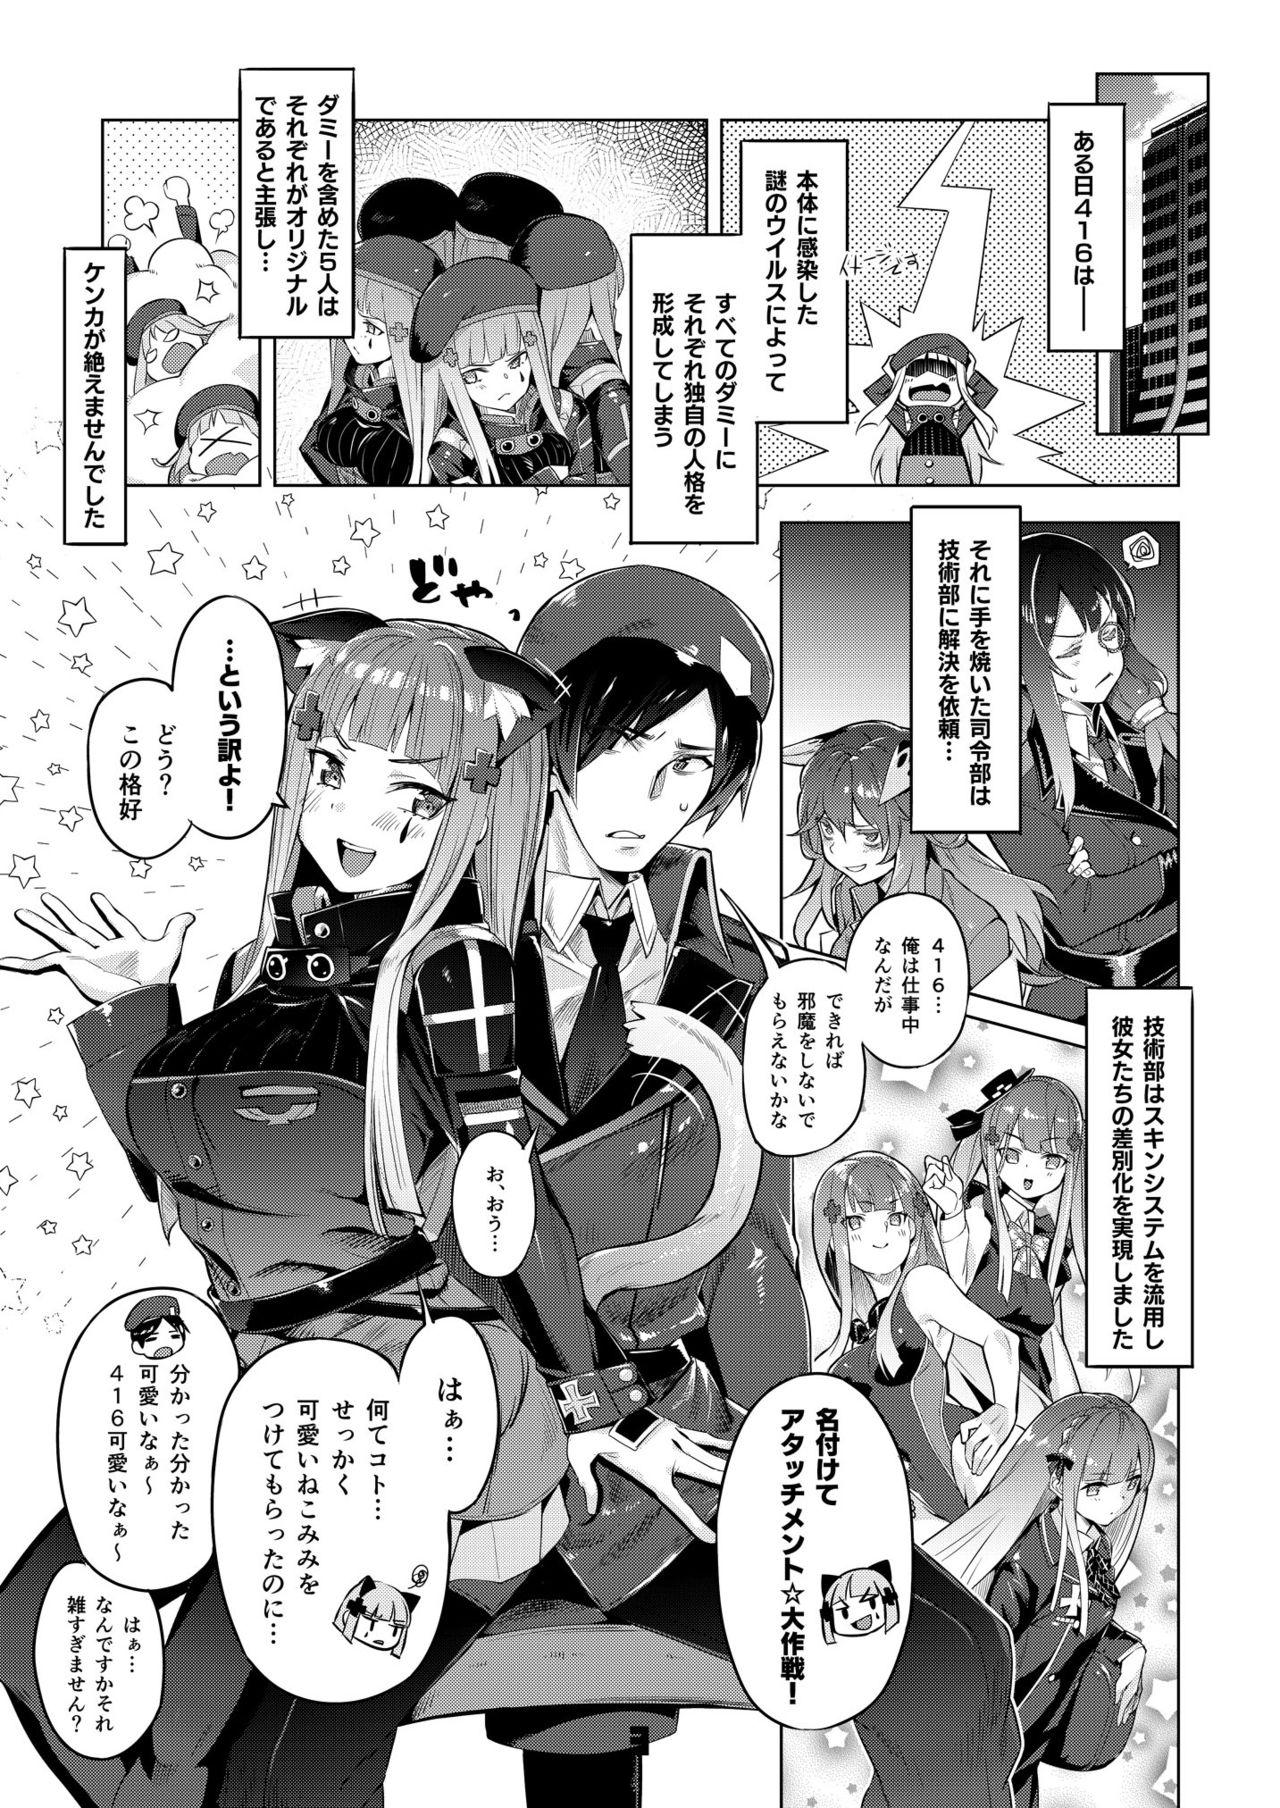 Roleplay Nekomimi Attachment - Girls frontline Party - Page 3